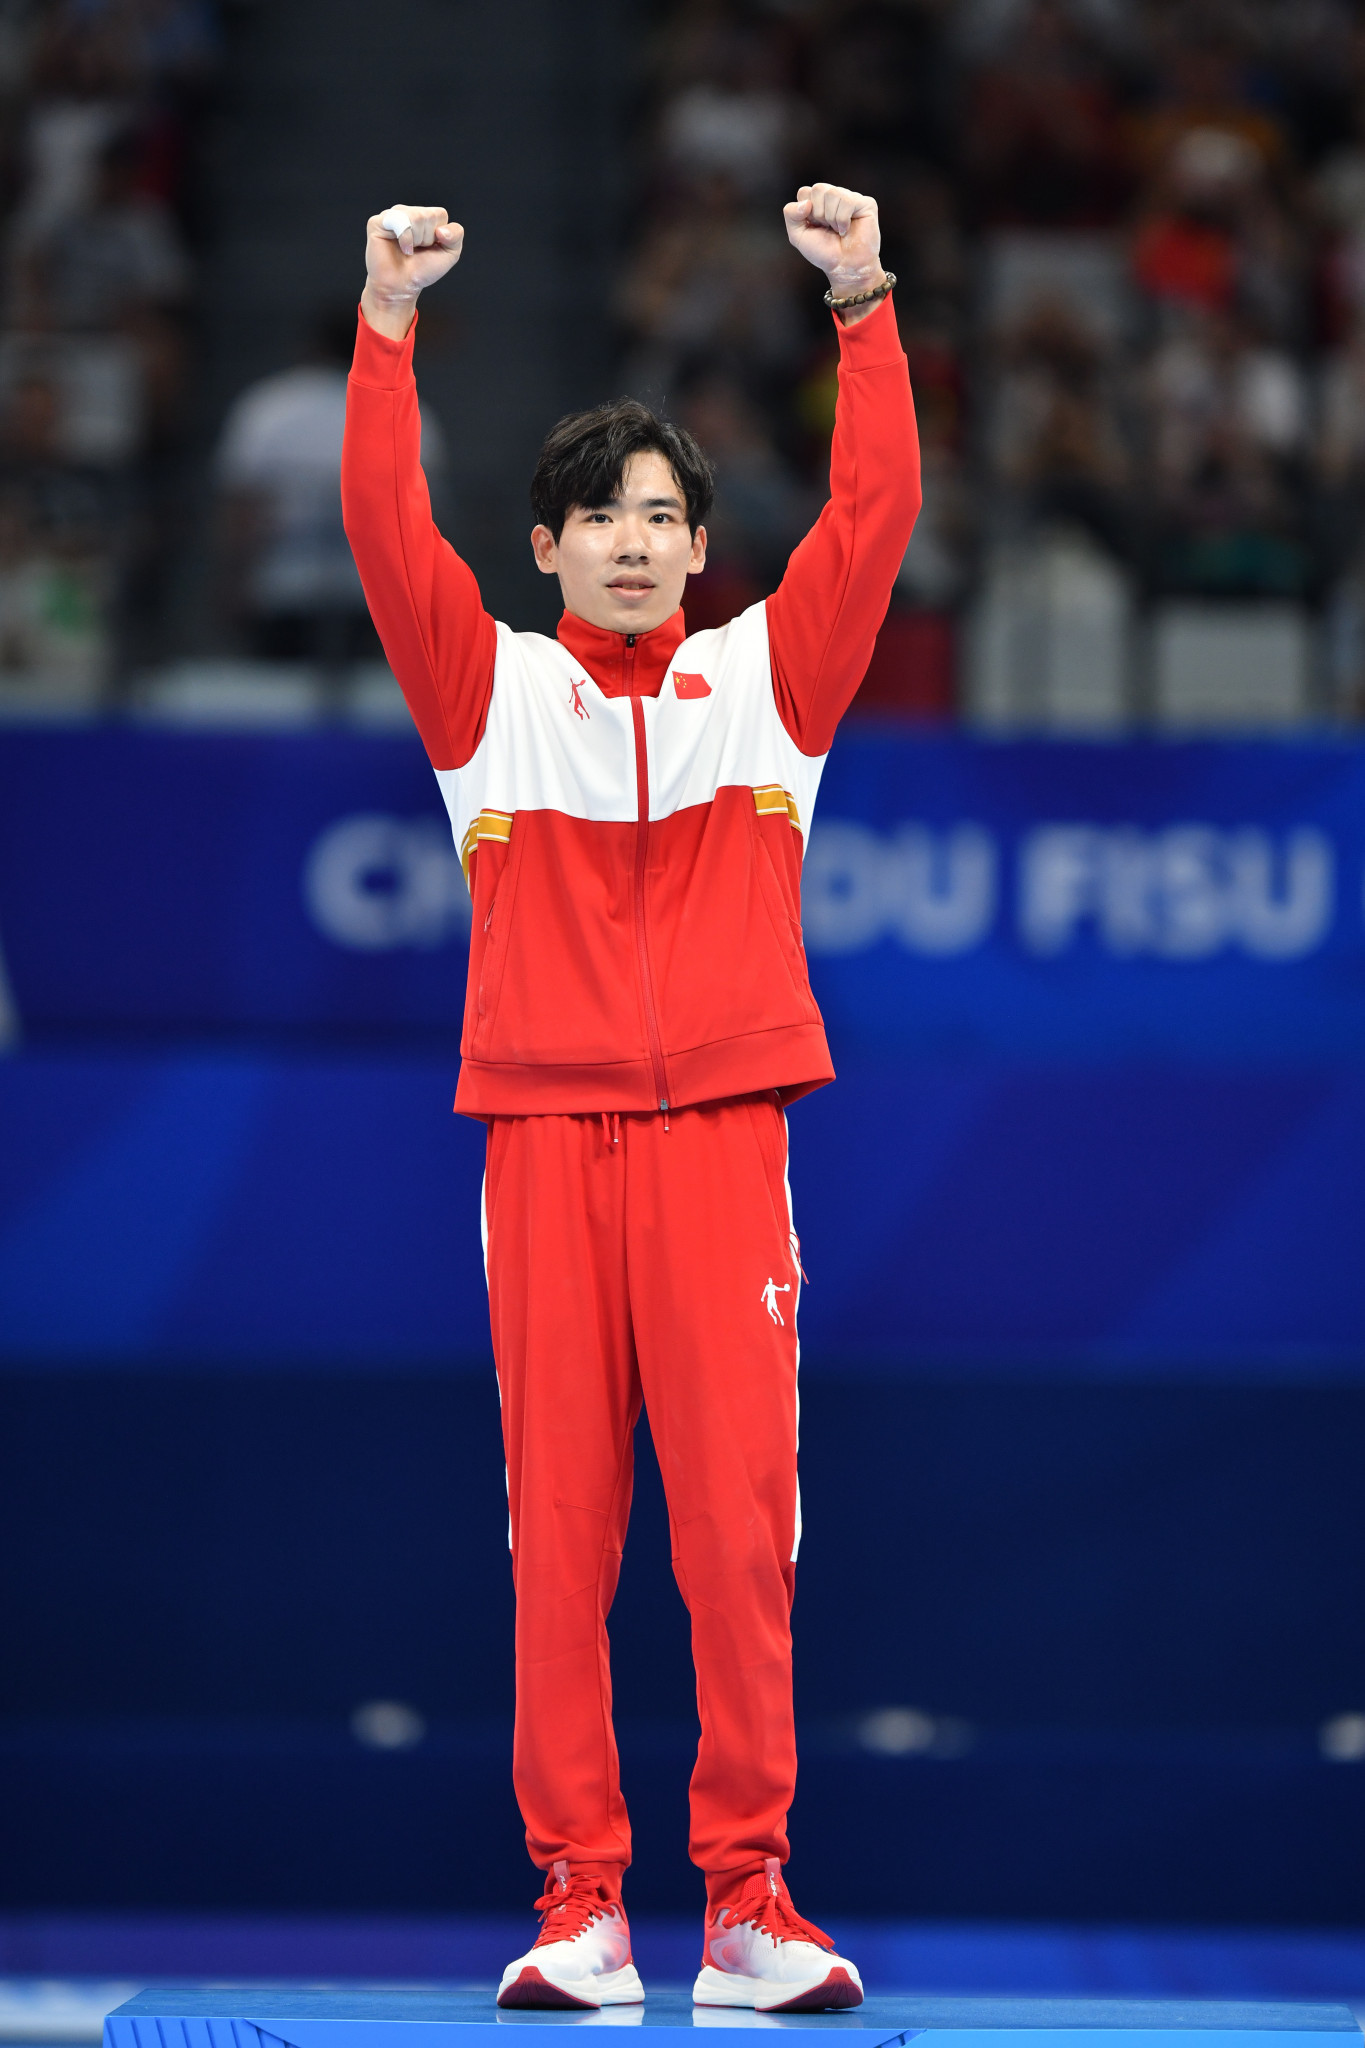 Zhang Boheng of China claimed the men's all-around title in gymnastics ©Chengdu 2021